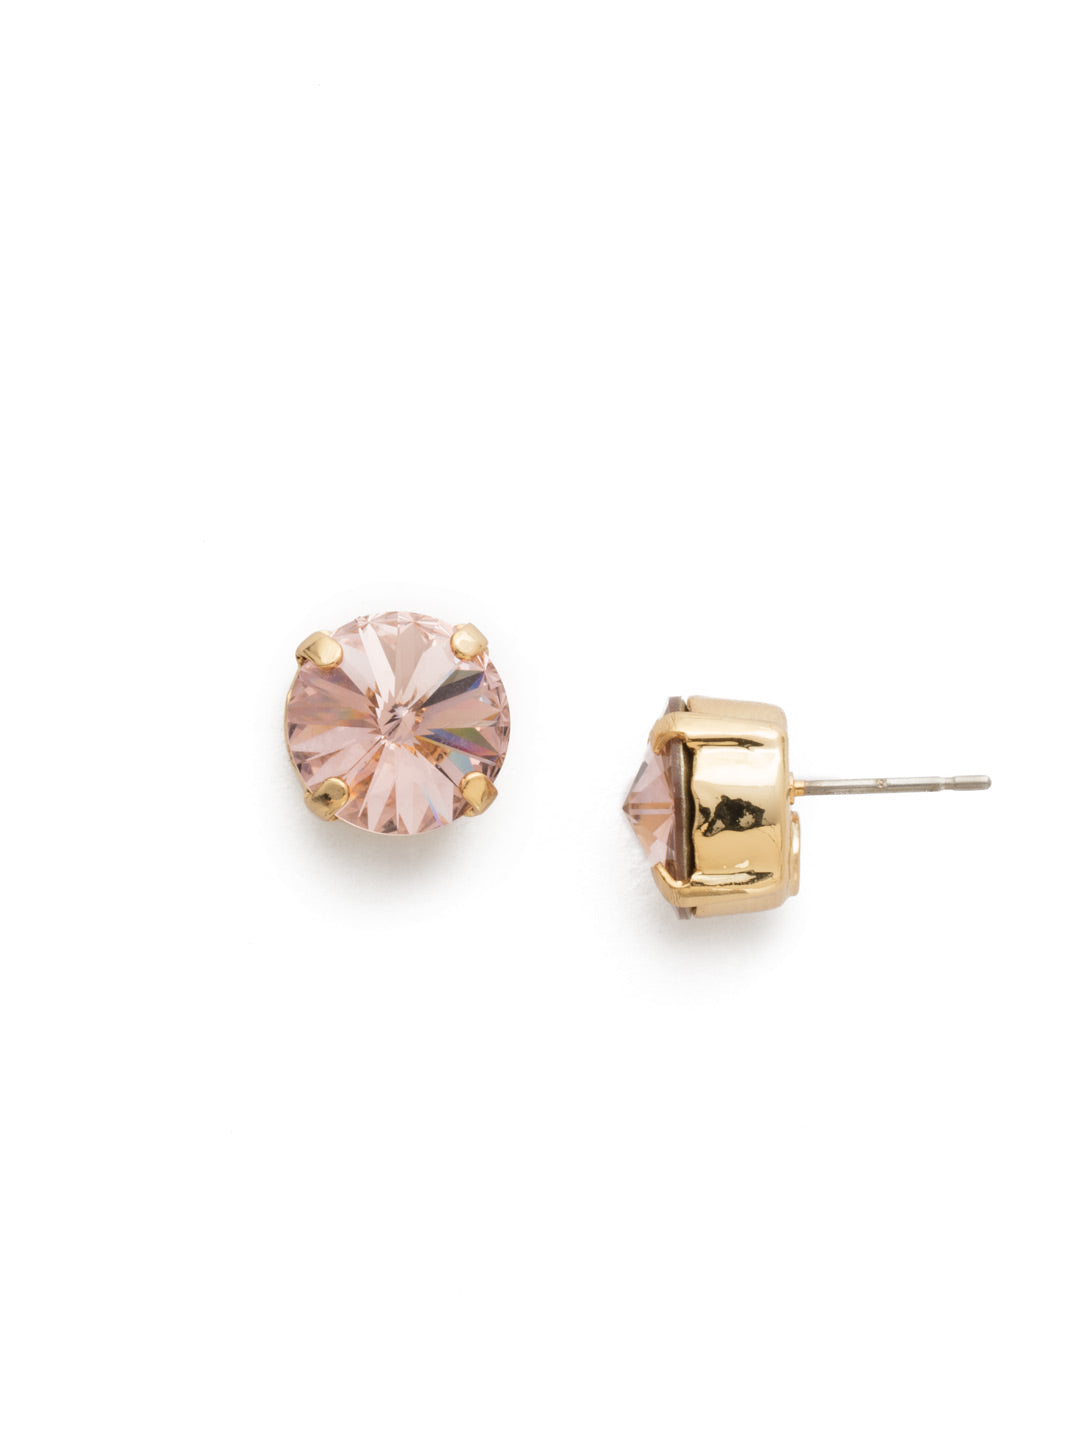 London Stud Earrings - ECM14BGVIN - <p>Everyone needs a great pair of studs. Add some classic sparkle to any occasion with these stud earrings. Need help picking a stud? <a href="https://www.sorrelli.com/blogs/sisterhood/round-stud-earrings-101-a-rundown-of-sizes-styles-and-sparkle">Check out our size guide!</a> From Sorrelli's Vintage Rose collection in our Bright Gold-tone finish.</p>